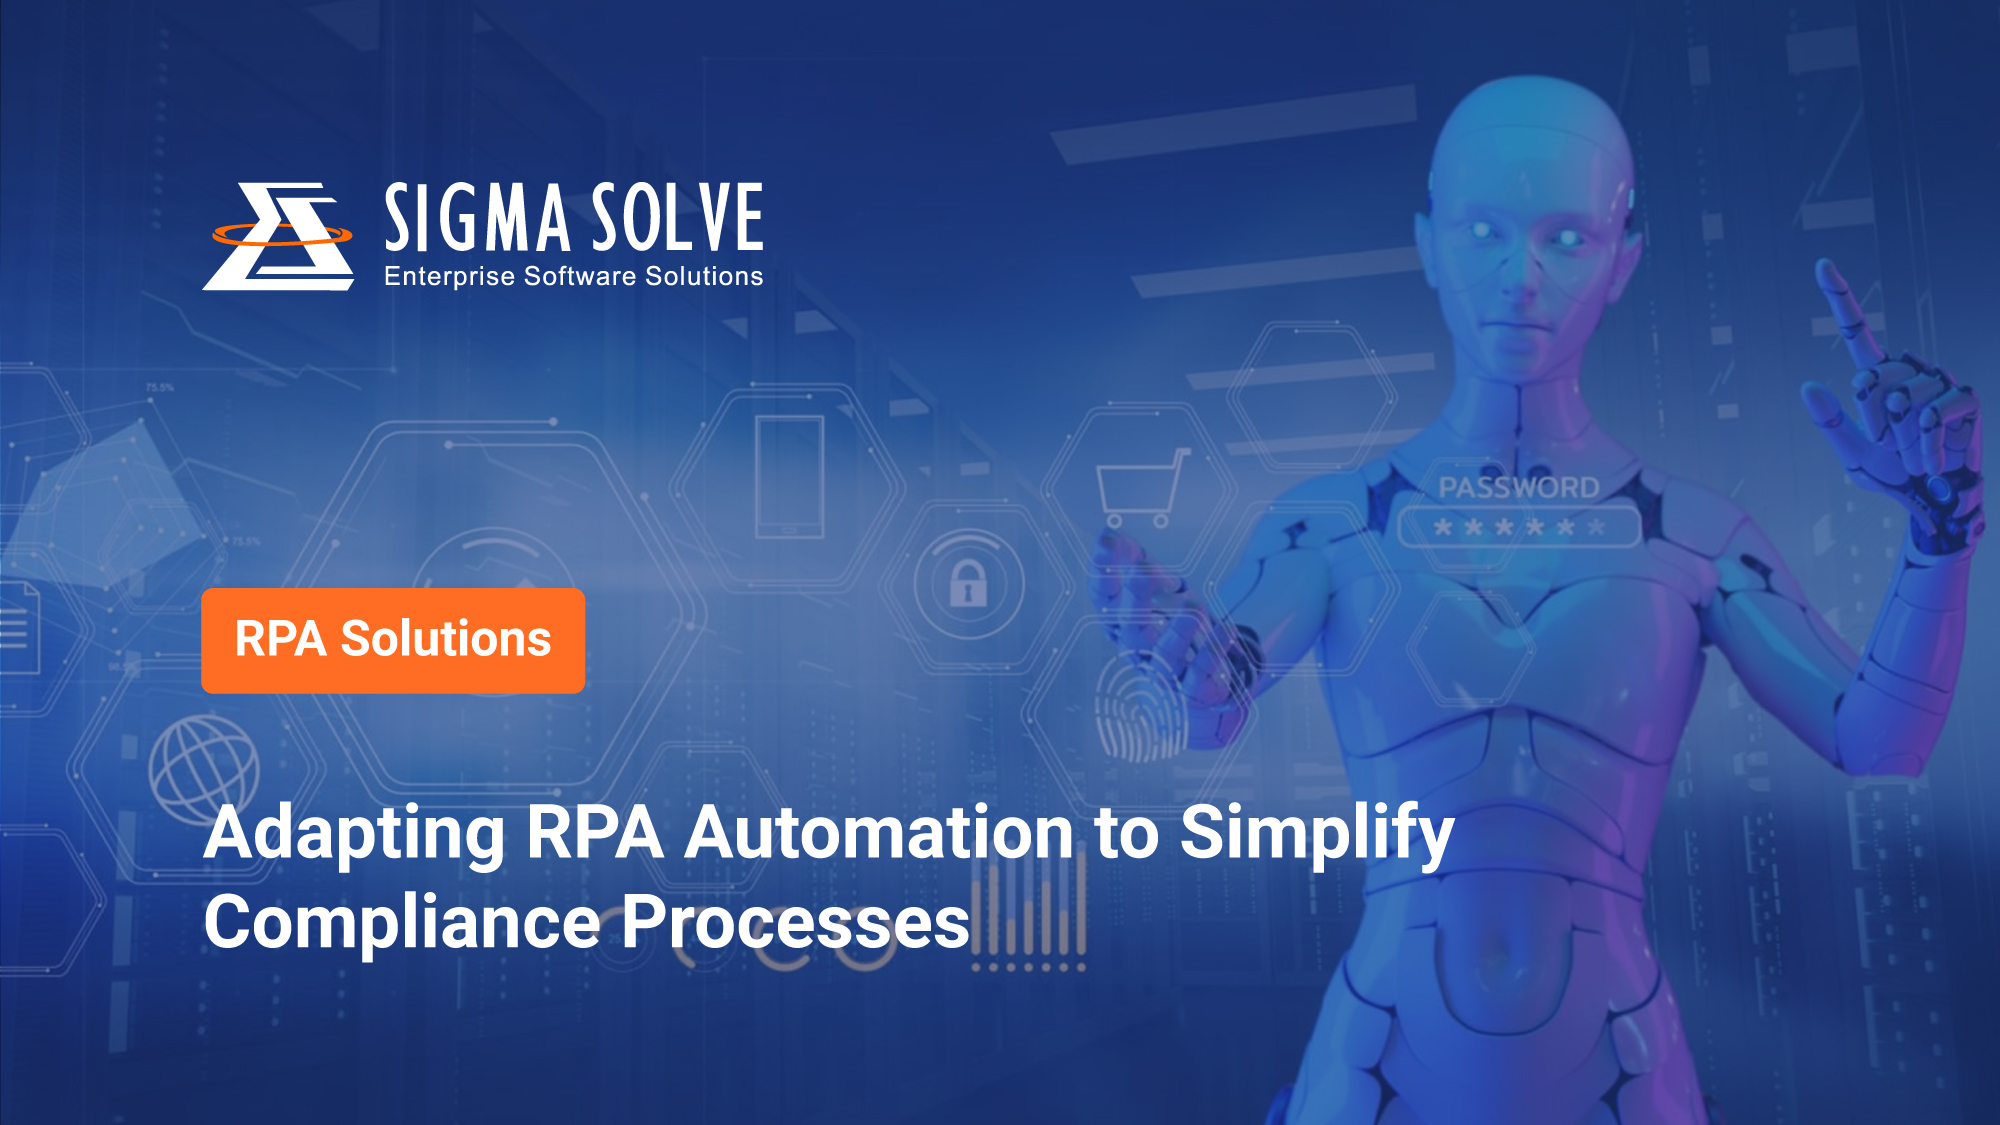 Adapting RPA Automation to Simplify Compliance Processes - Sigma Solve Inc